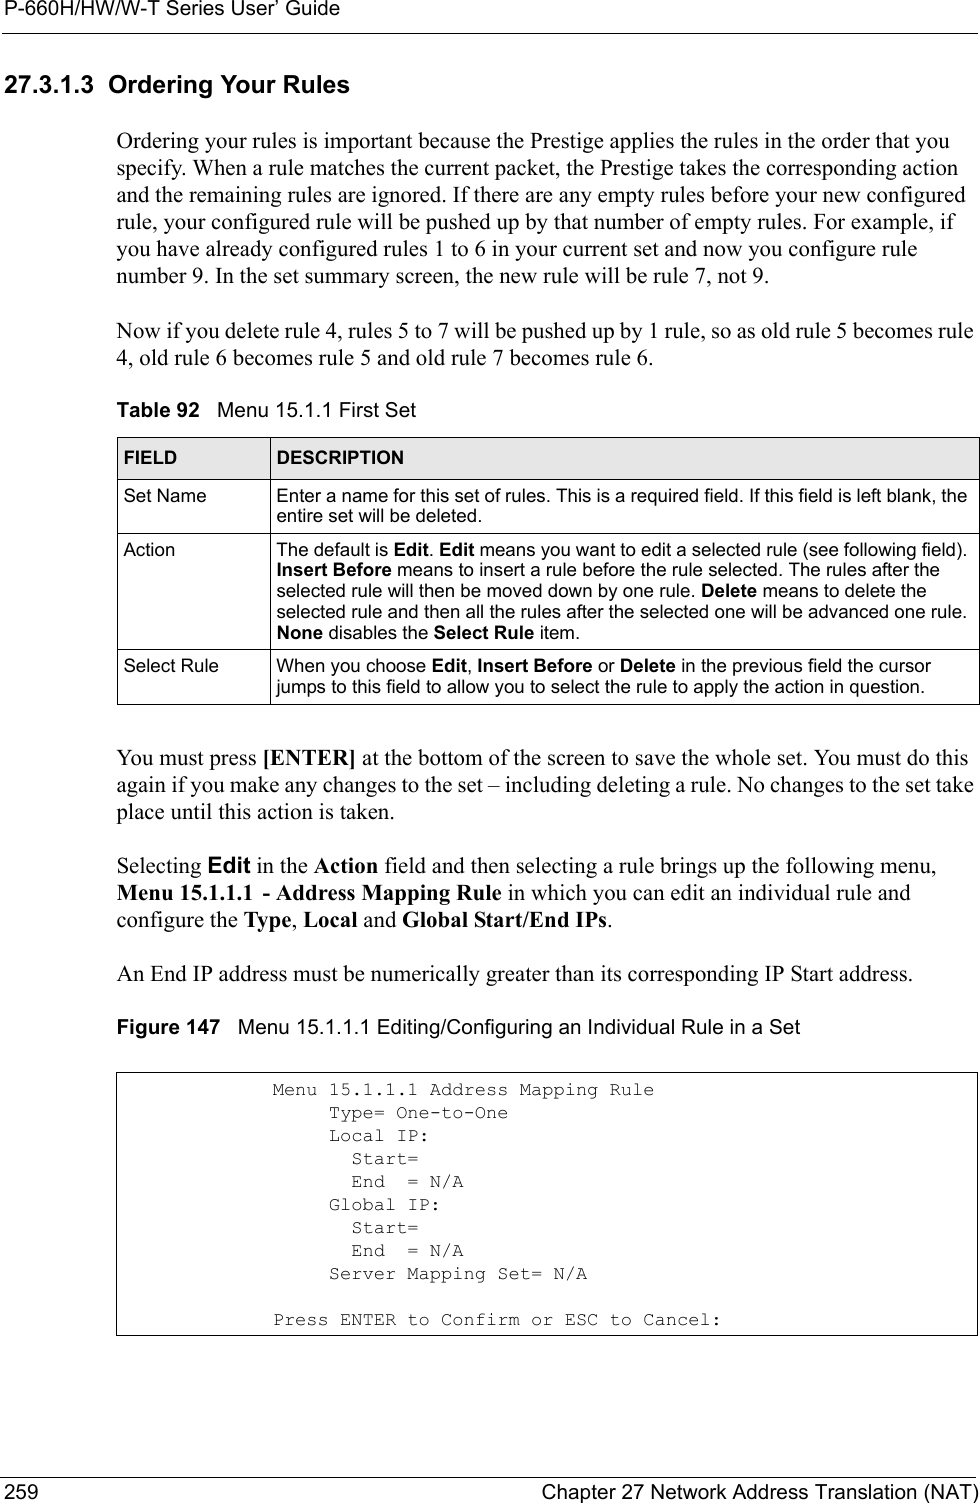 P-660H/HW/W-T Series User’ Guide259 Chapter 27 Network Address Translation (NAT)27.3.1.3  Ordering Your RulesOrdering your rules is important because the Prestige applies the rules in the order that you specify. When a rule matches the current packet, the Prestige takes the corresponding action and the remaining rules are ignored. If there are any empty rules before your new configured rule, your configured rule will be pushed up by that number of empty rules. For example, if you have already configured rules 1 to 6 in your current set and now you configure rule number 9. In the set summary screen, the new rule will be rule 7, not 9. Now if you delete rule 4, rules 5 to 7 will be pushed up by 1 rule, so as old rule 5 becomes rule 4, old rule 6 becomes rule 5 and old rule 7 becomes rule 6. You must press [ENTER] at the bottom of the screen to save the whole set. You must do this again if you make any changes to the set – including deleting a rule. No changes to the set take place until this action is taken. Selecting Edit in the Action field and then selecting a rule brings up the following menu, Menu 15.1.1.1 - Address Mapping Rule in which you can edit an individual rule and configure the Type, Local and Global Start/End IPs.An End IP address must be numerically greater than its corresponding IP Start address.Figure 147   Menu 15.1.1.1 Editing/Configuring an Individual Rule in a Set Table 92   Menu 15.1.1 First SetFIELD DESCRIPTIONSet Name Enter a name for this set of rules. This is a required field. If this field is left blank, the entire set will be deleted.Action The default is Edit. Edit means you want to edit a selected rule (see following field). Insert Before means to insert a rule before the rule selected. The rules after the selected rule will then be moved down by one rule. Delete means to delete the selected rule and then all the rules after the selected one will be advanced one rule. None disables the Select Rule item.Select Rule When you choose Edit, Insert Before or Delete in the previous field the cursor jumps to this field to allow you to select the rule to apply the action in question.Menu 15.1.1.1 Address Mapping Rule     Type= One-to-One     Local IP:       Start=       End  = N/A     Global IP:       Start=       End  = N/A     Server Mapping Set= N/APress ENTER to Confirm or ESC to Cancel: